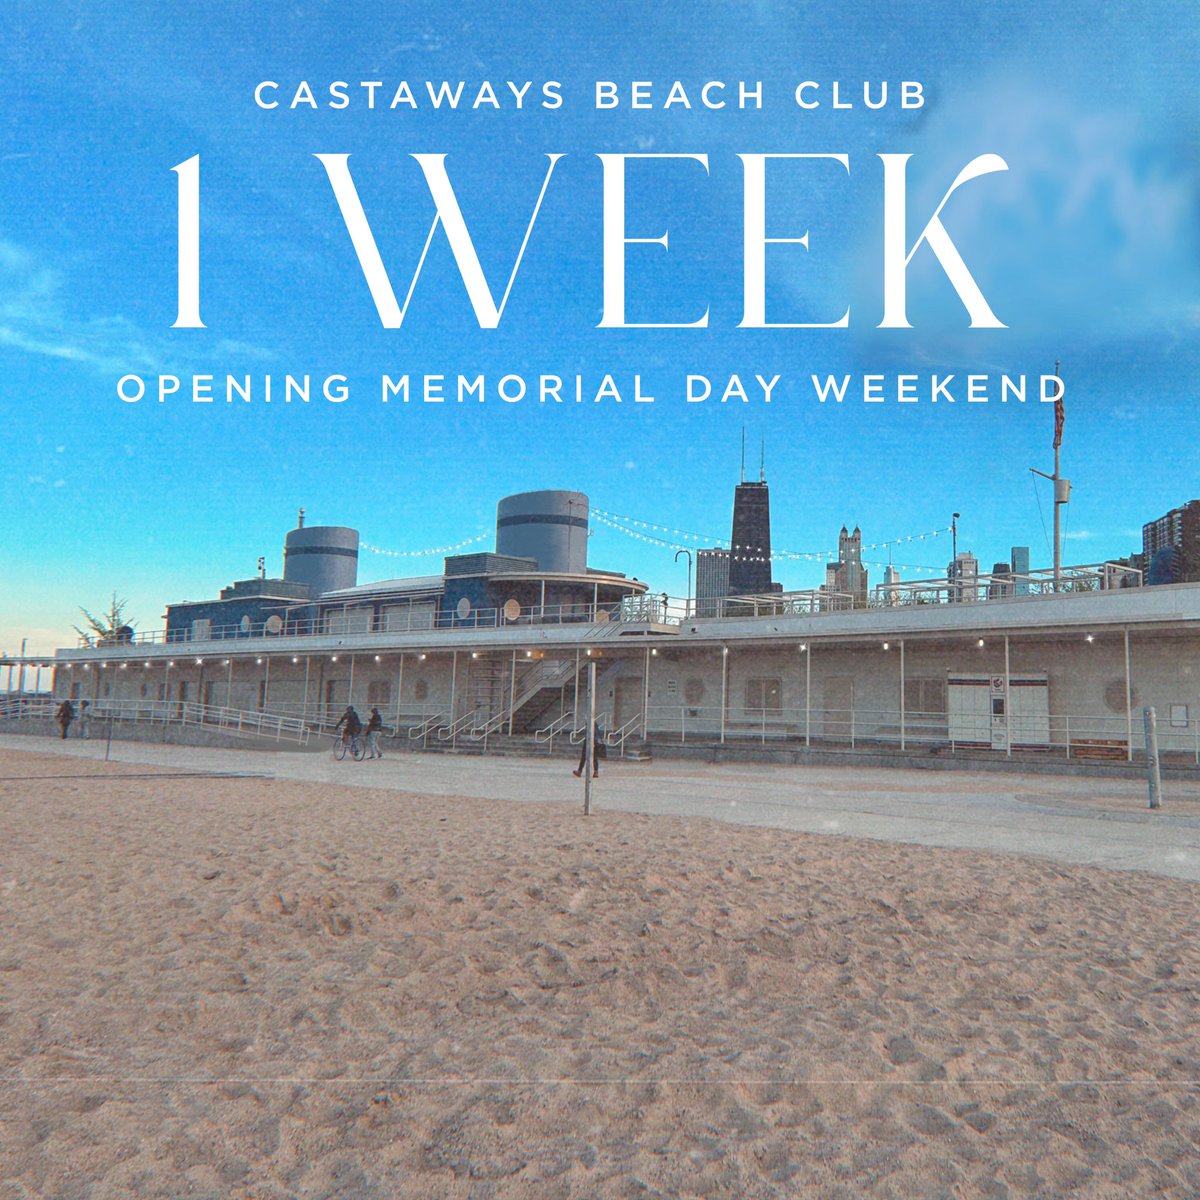 1 week to go! SummertimeChi officially begins next Friday, May 24th as we open Castaways Beach Club at 11am. Spend the entire weekend celebrating with us in the new digs. We’ll have DJs spinning Saturday and Sunday and a live band playing on Monday. Plus: brand new menus 😎